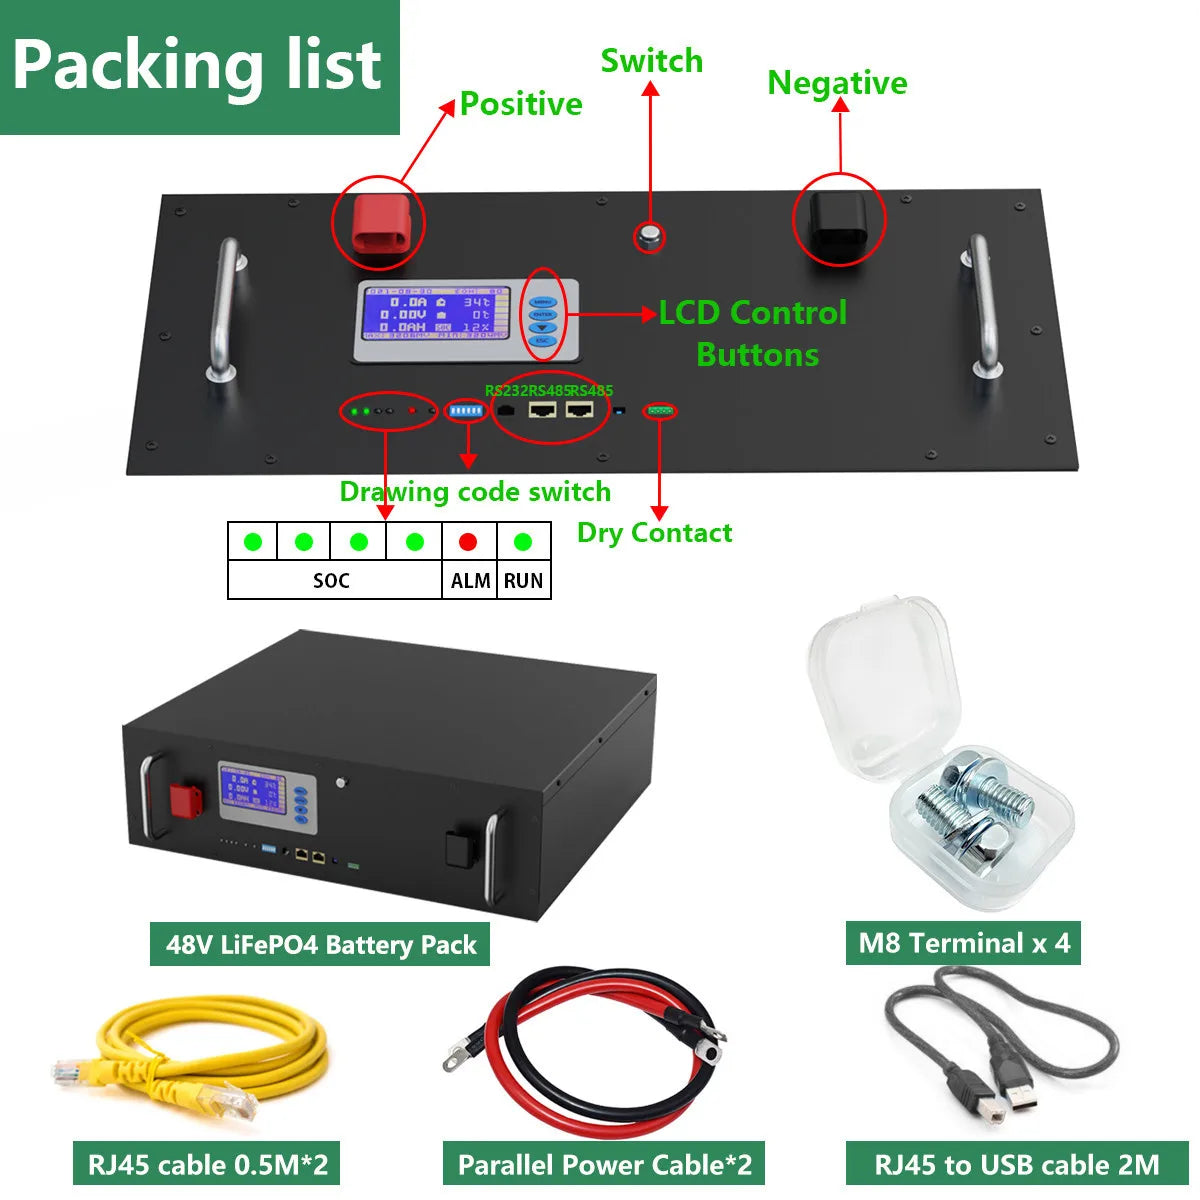 LiFePO4 48V 3KW Battery, Packaging contents: terminals, control panel, cables, and accessories for device setup and operation.